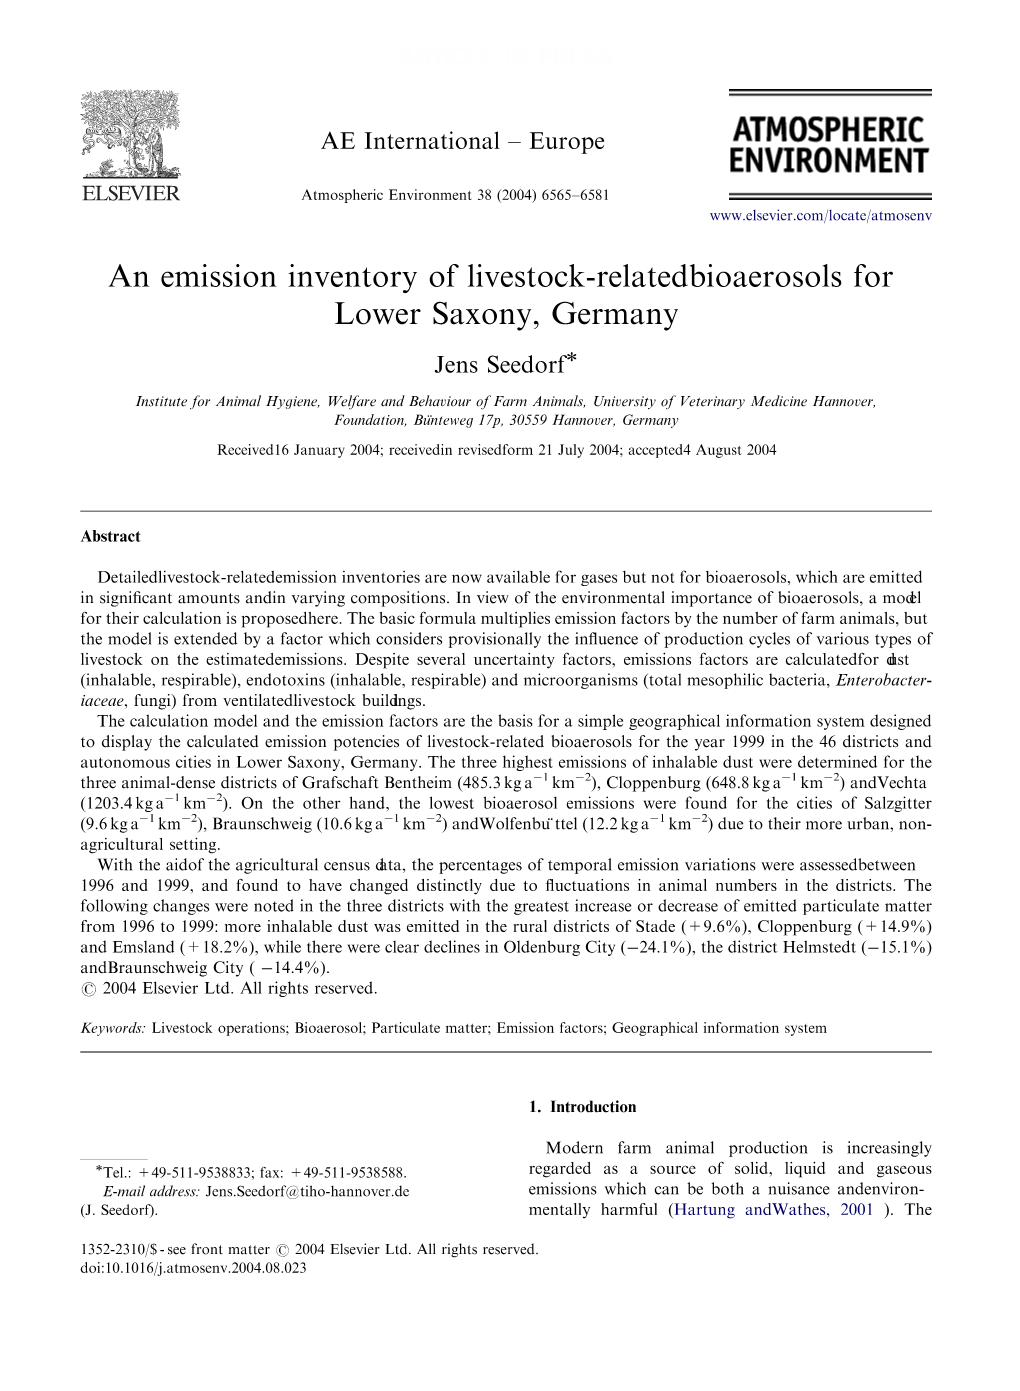 An Emission Inventory of Livestock-Related Bioaerosols For